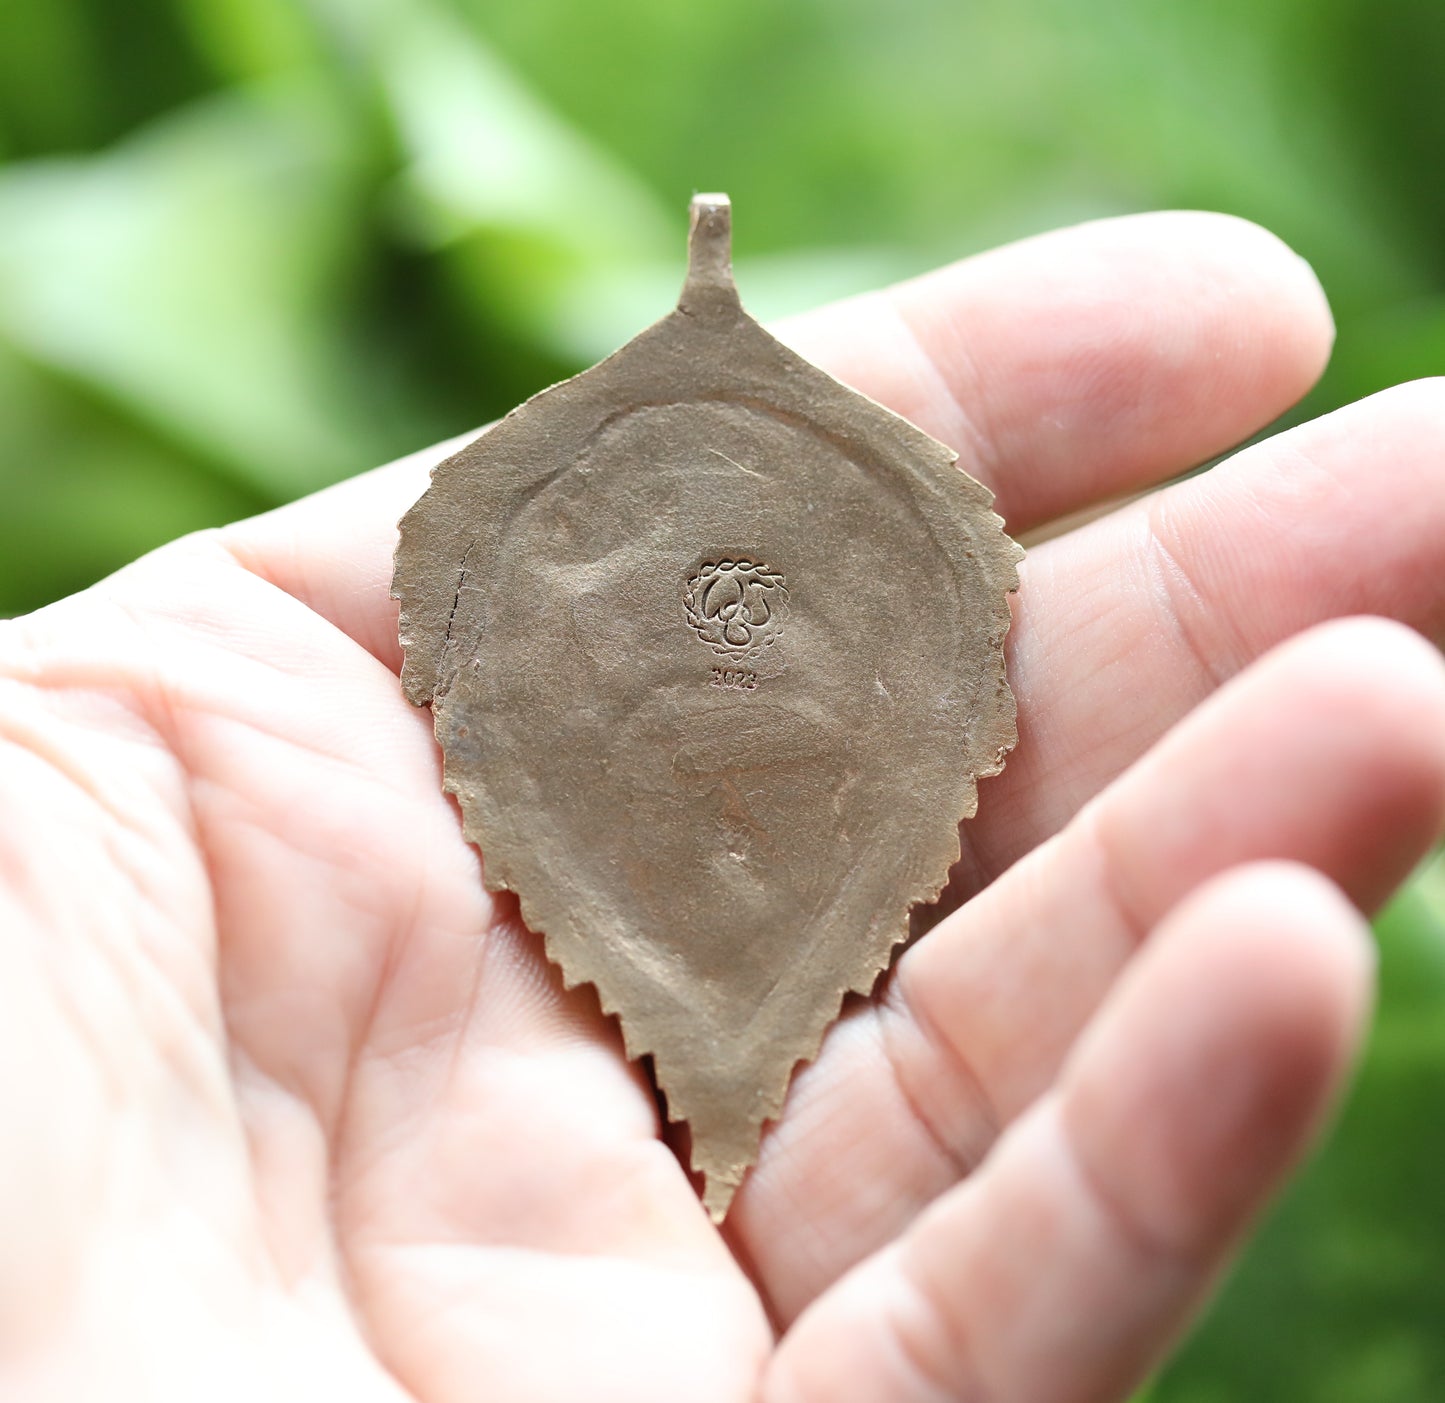 Handmade Birch Leaf pendant with Beautiful Image Featuring a pond